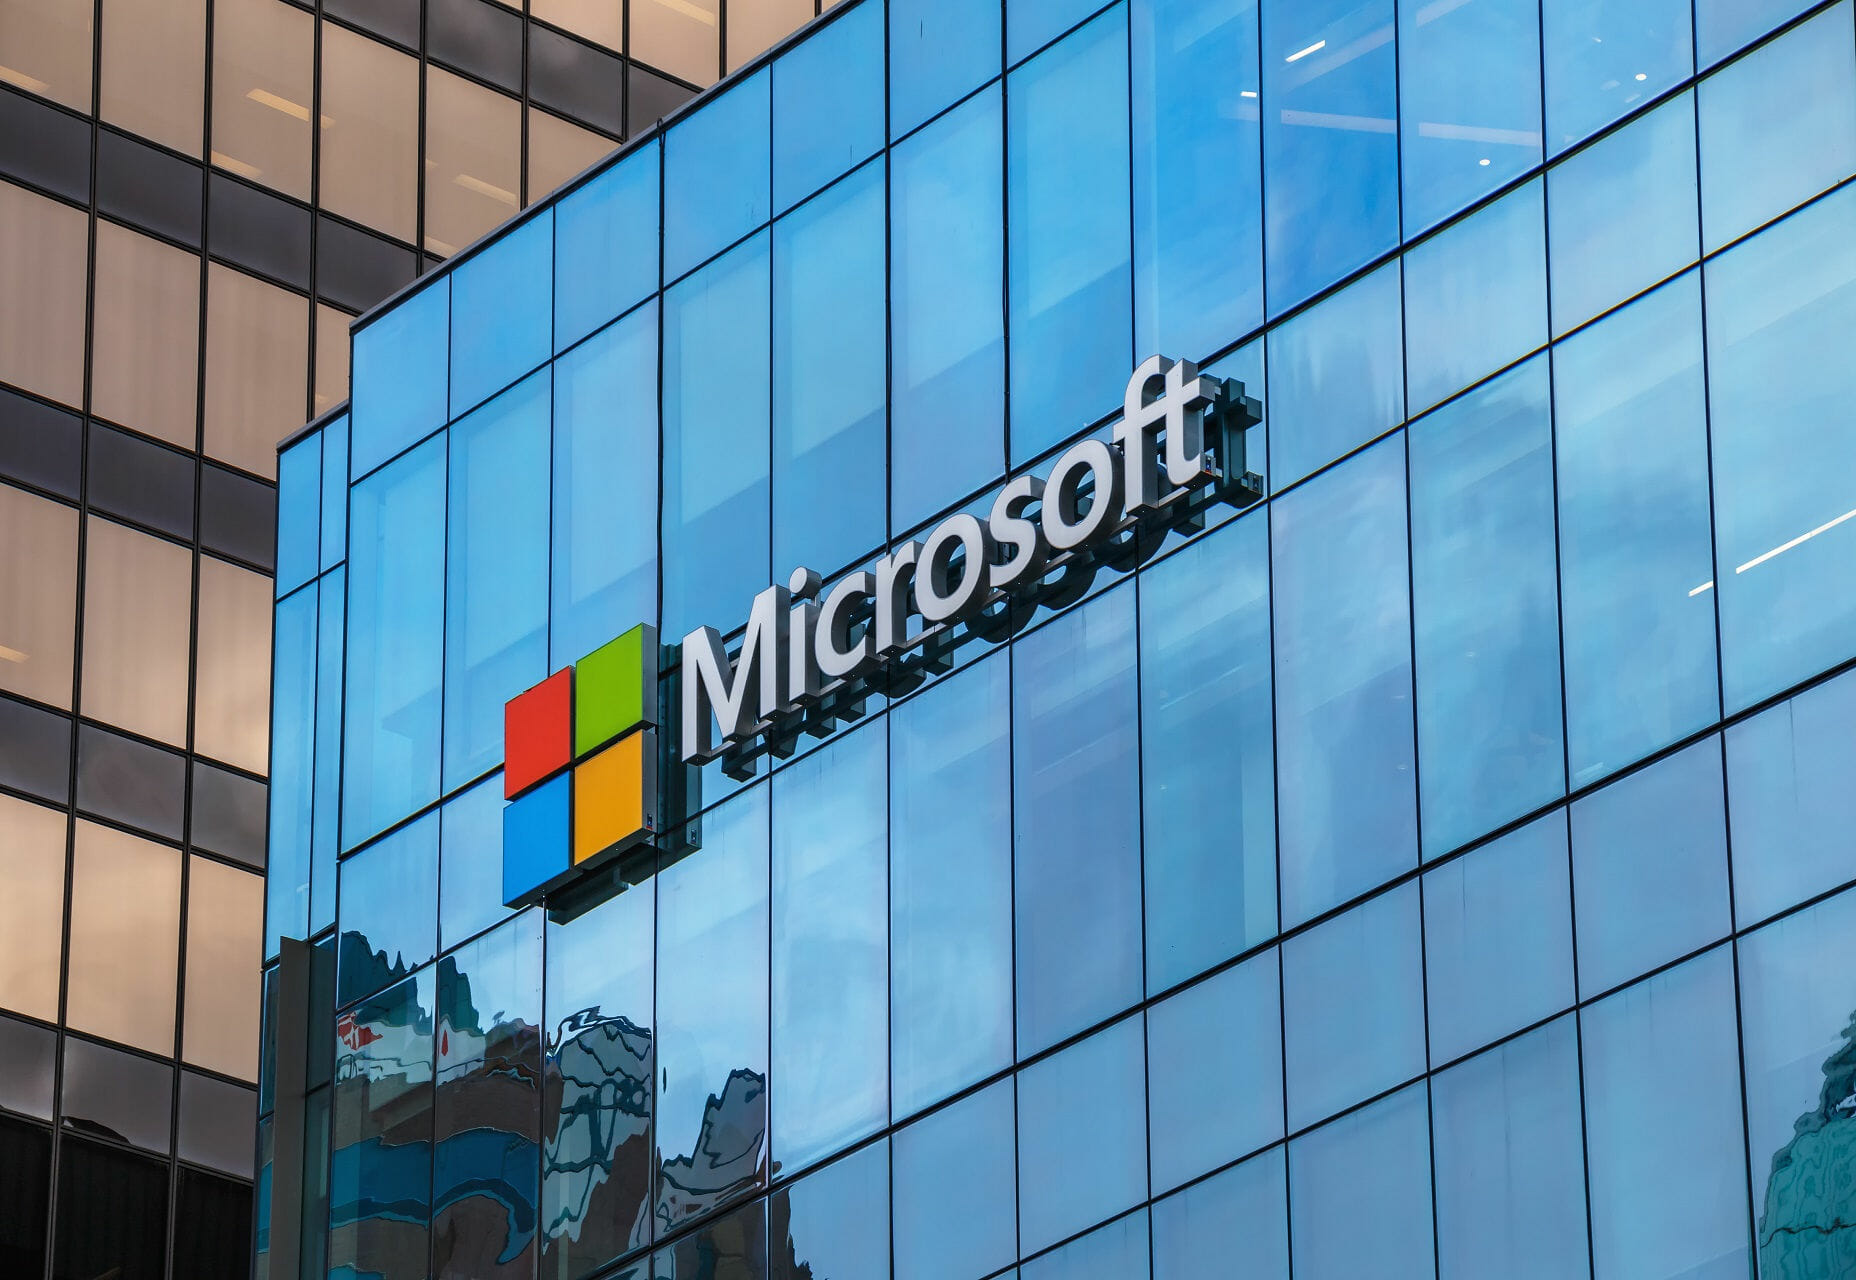 Microsoft Azure is set to be the top cloud platform